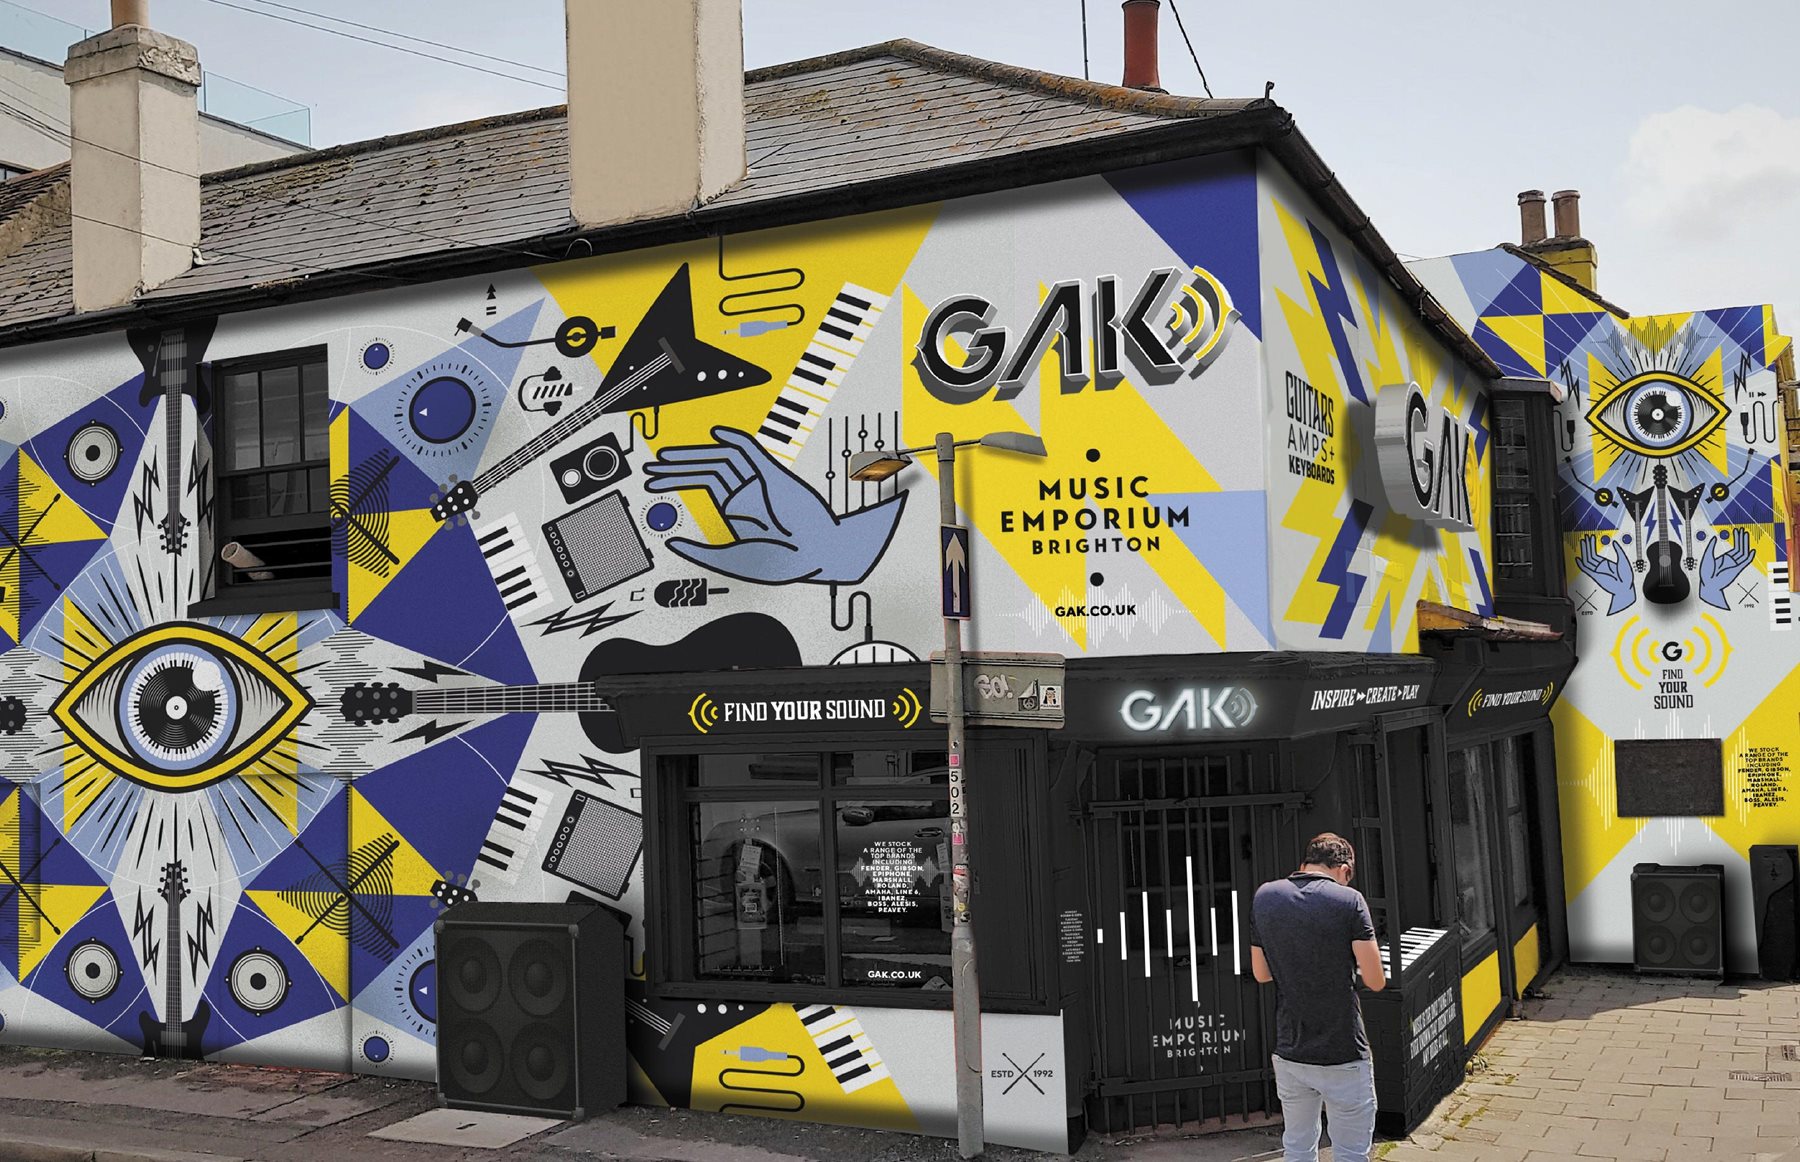 An example of a new shop front with the building walls painted in a yellow and blue kaleidoscope design from the new brand